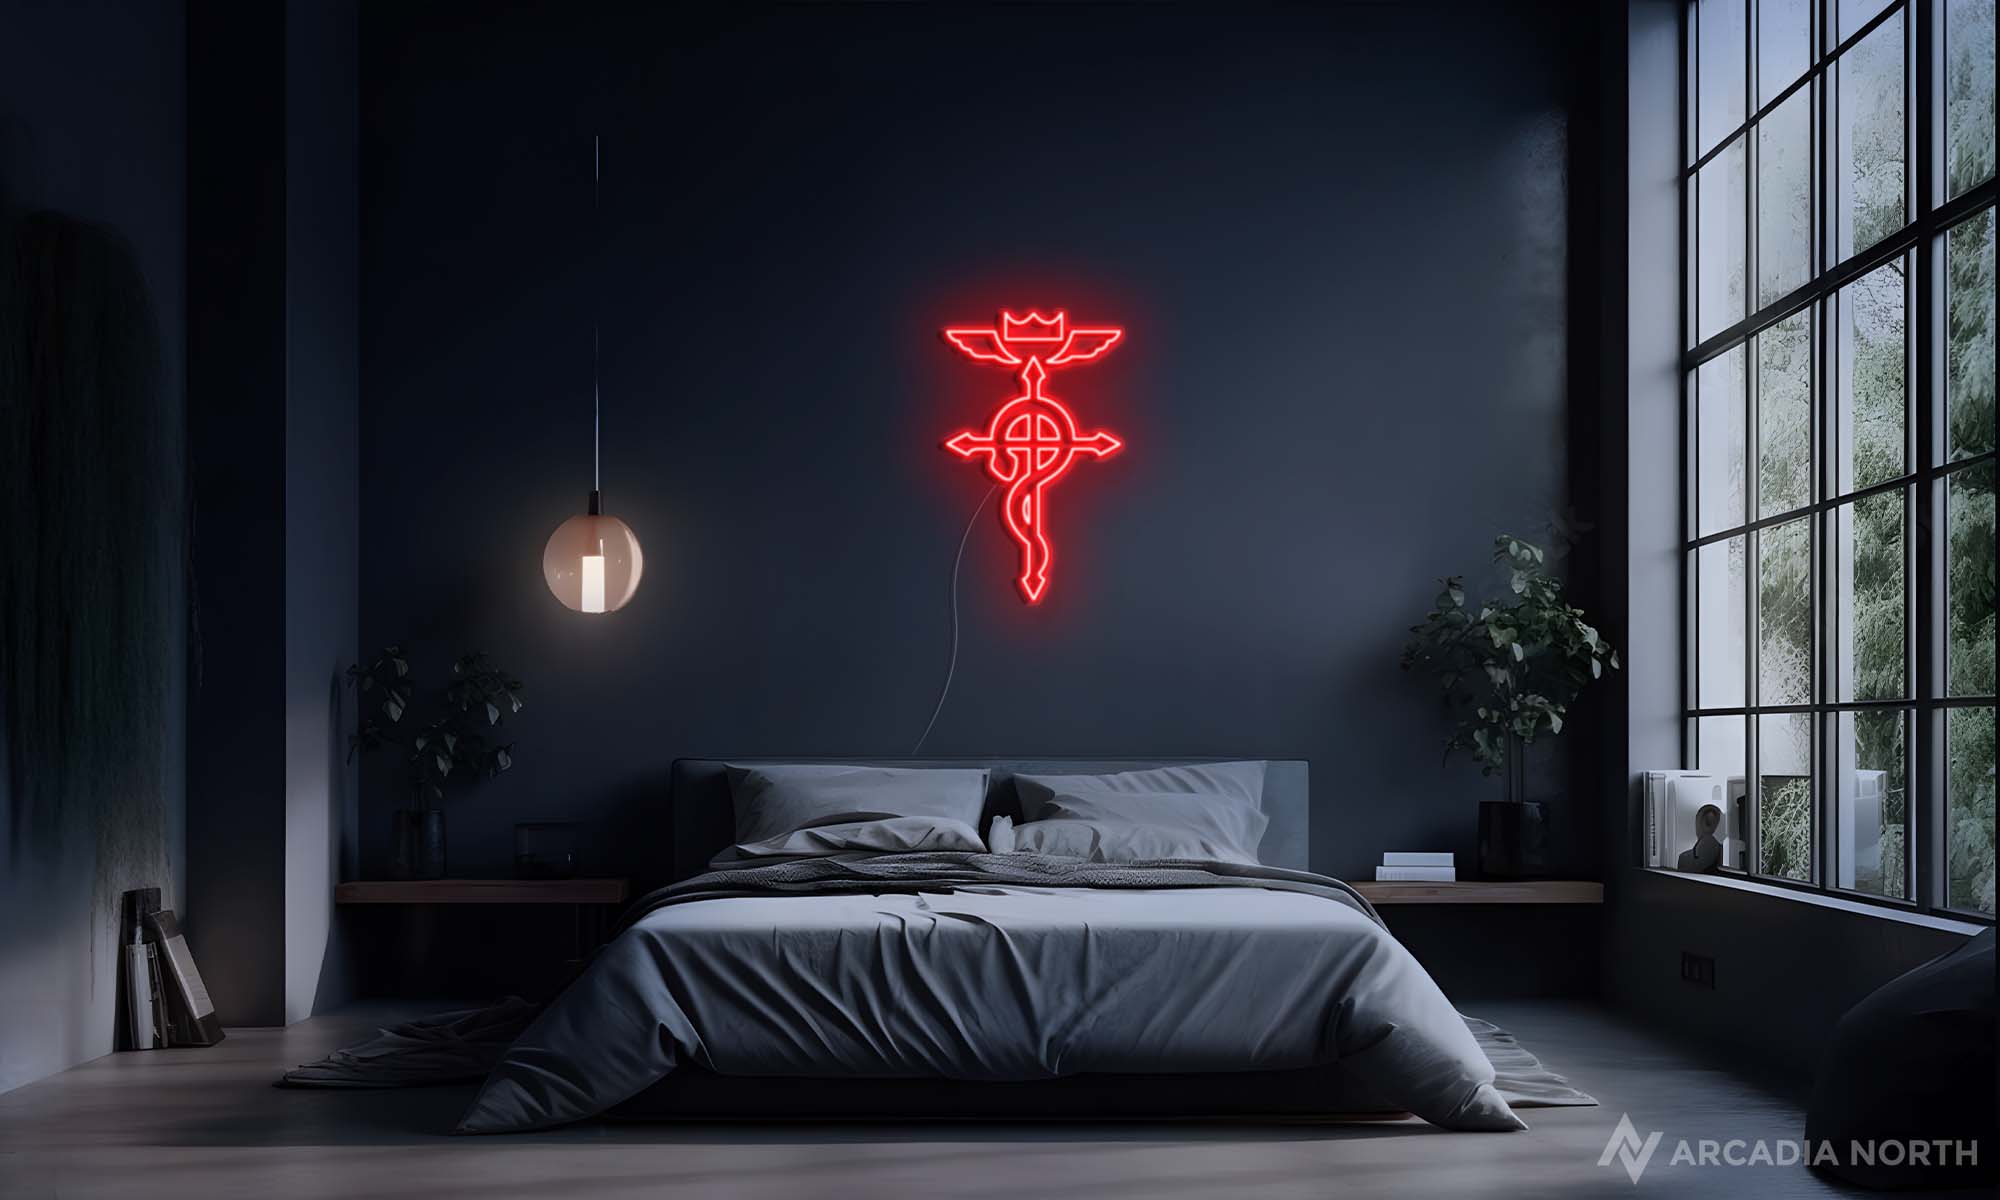 Modern bedroom with a red Fullmetal Alchemist anime Flamel symbol neon sign glowing on the wall above the bed